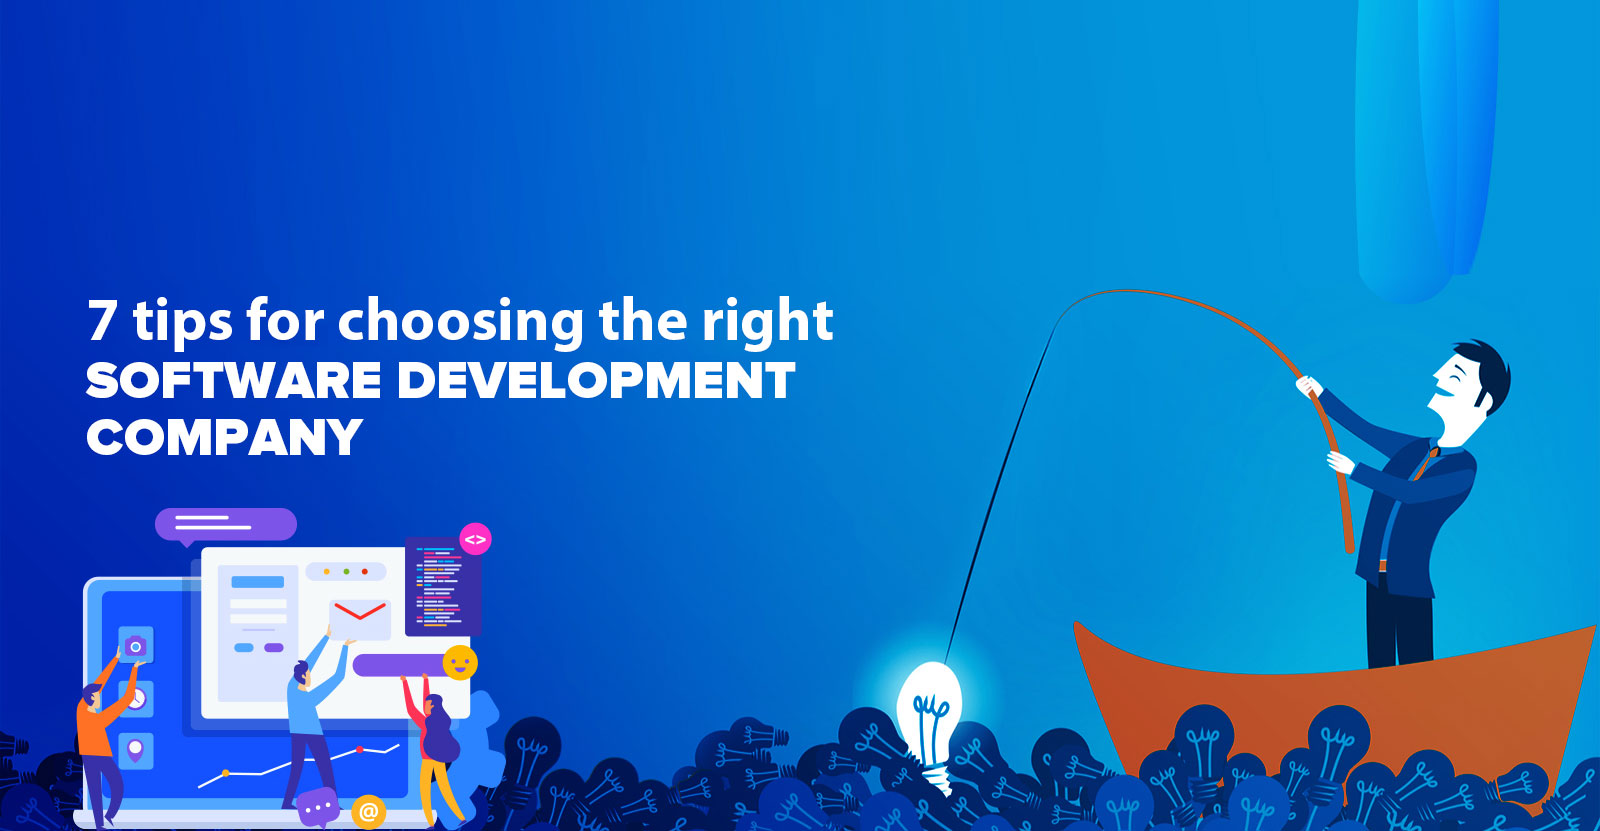 7 tips for choosing the right software development company